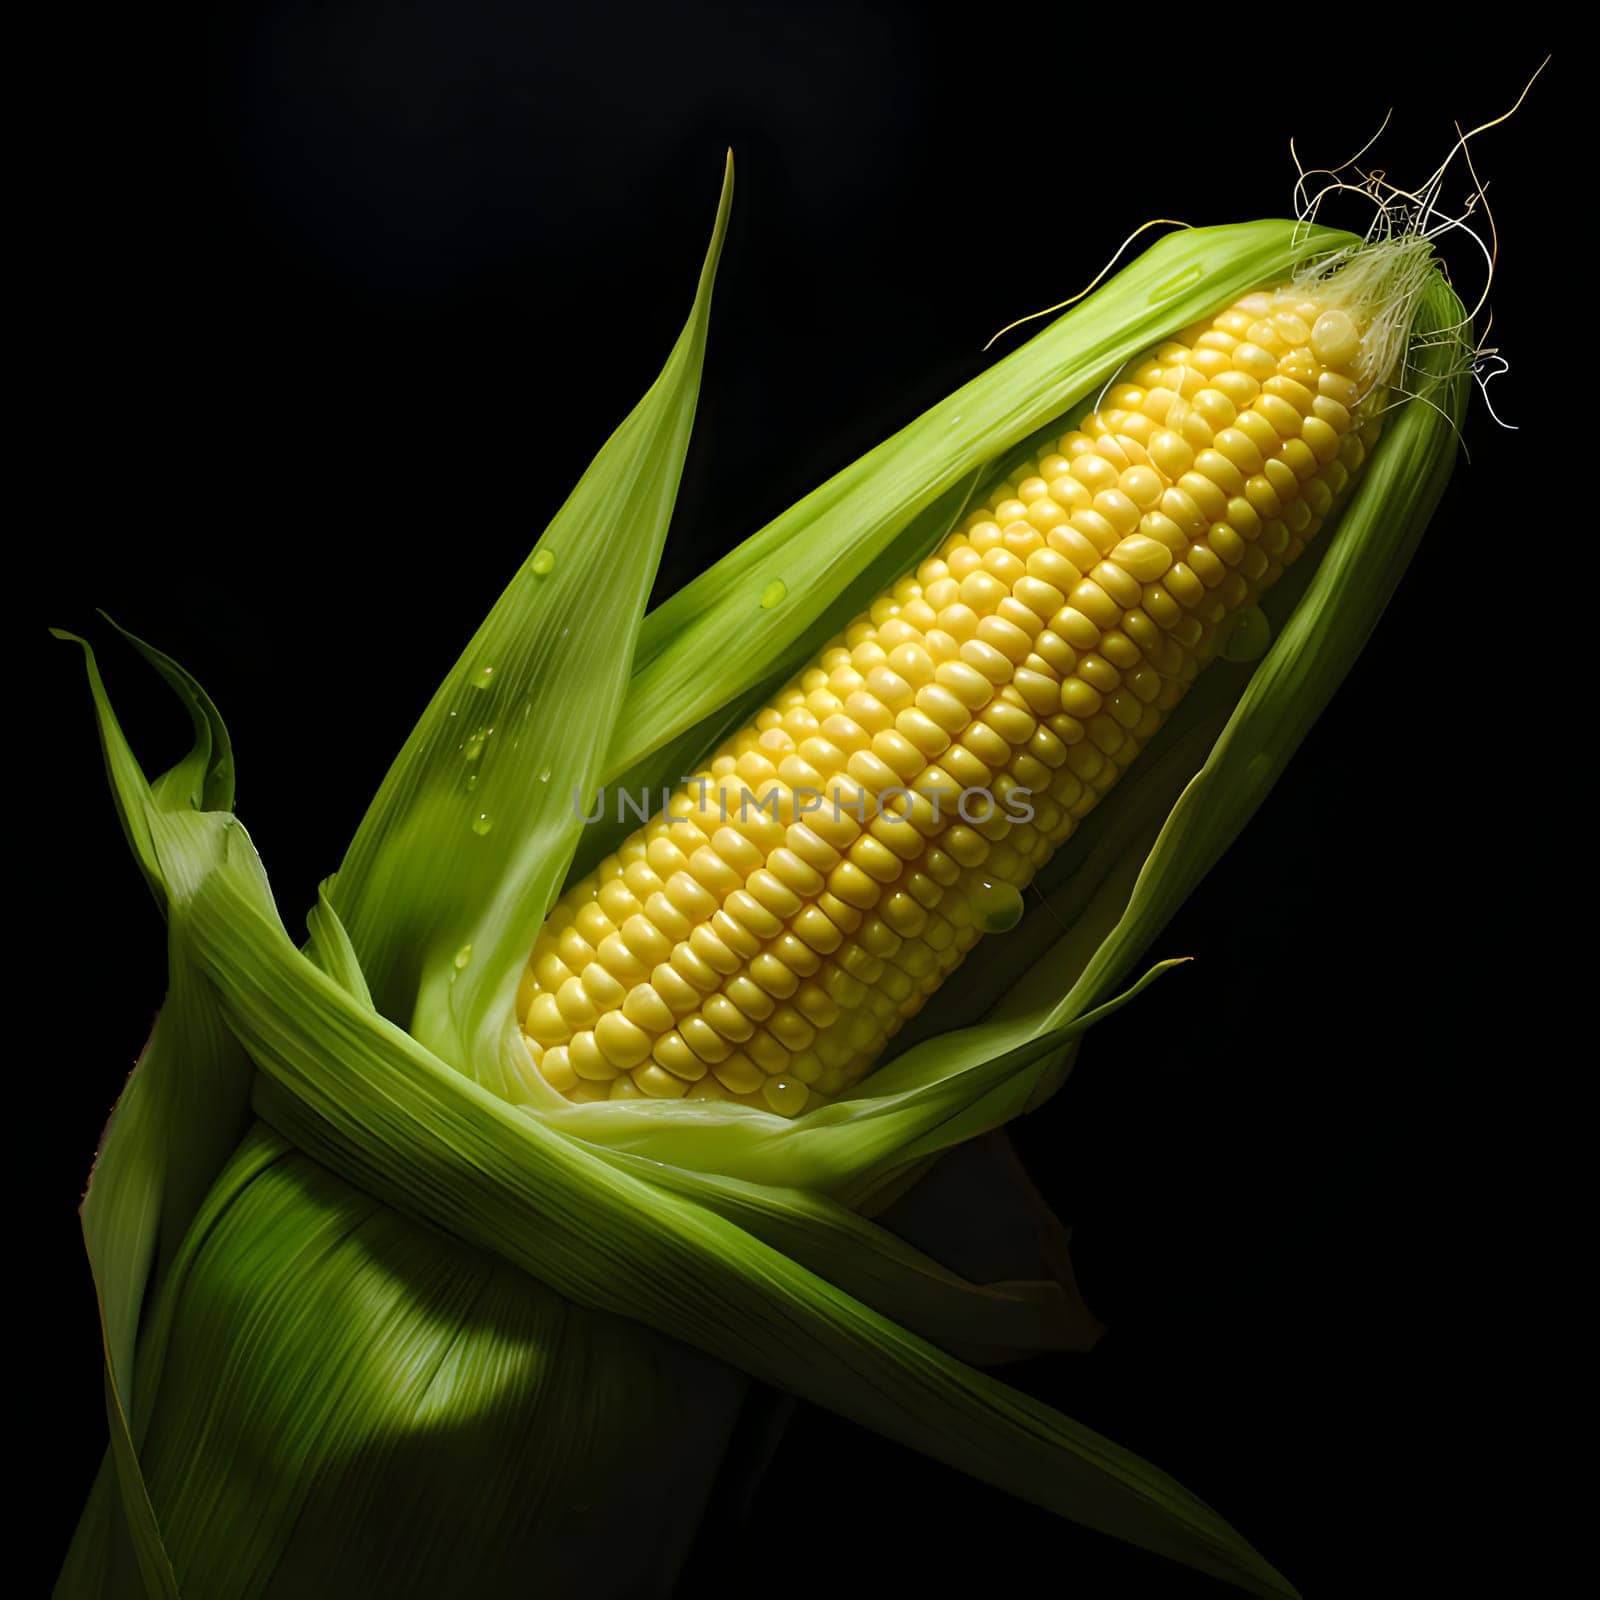 Yellow corn cob in leaf on black background. Corn as a dish of thanksgiving for the harvest. An atmosphere of joy and celebration.